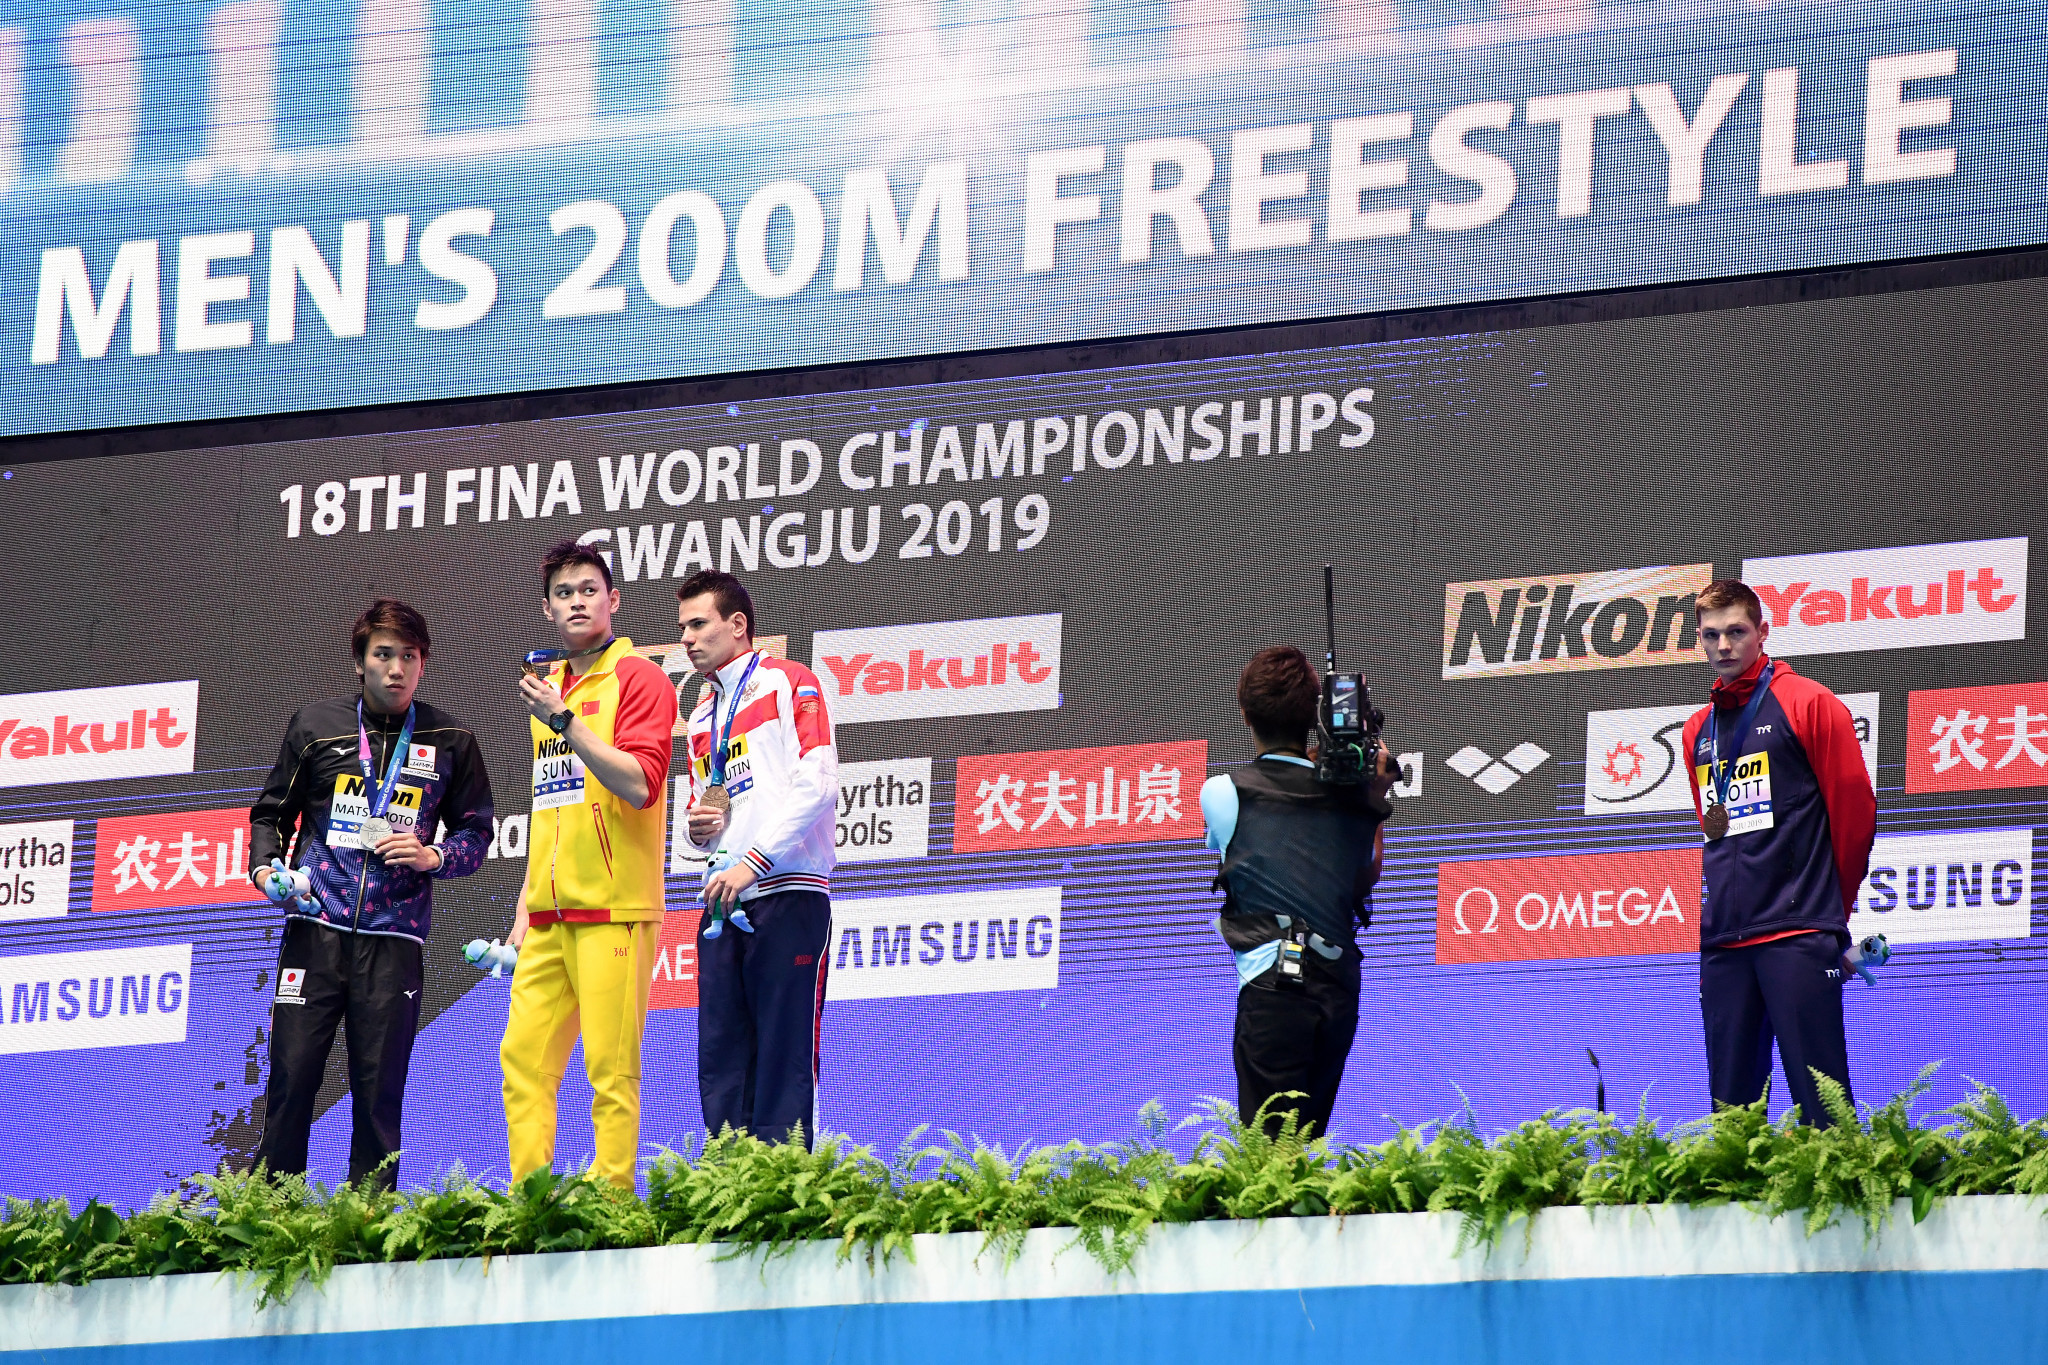 Duncan Scott -far right - and Mack Horton have both taken a stance against Sun Yang on the podium ©Getty Images